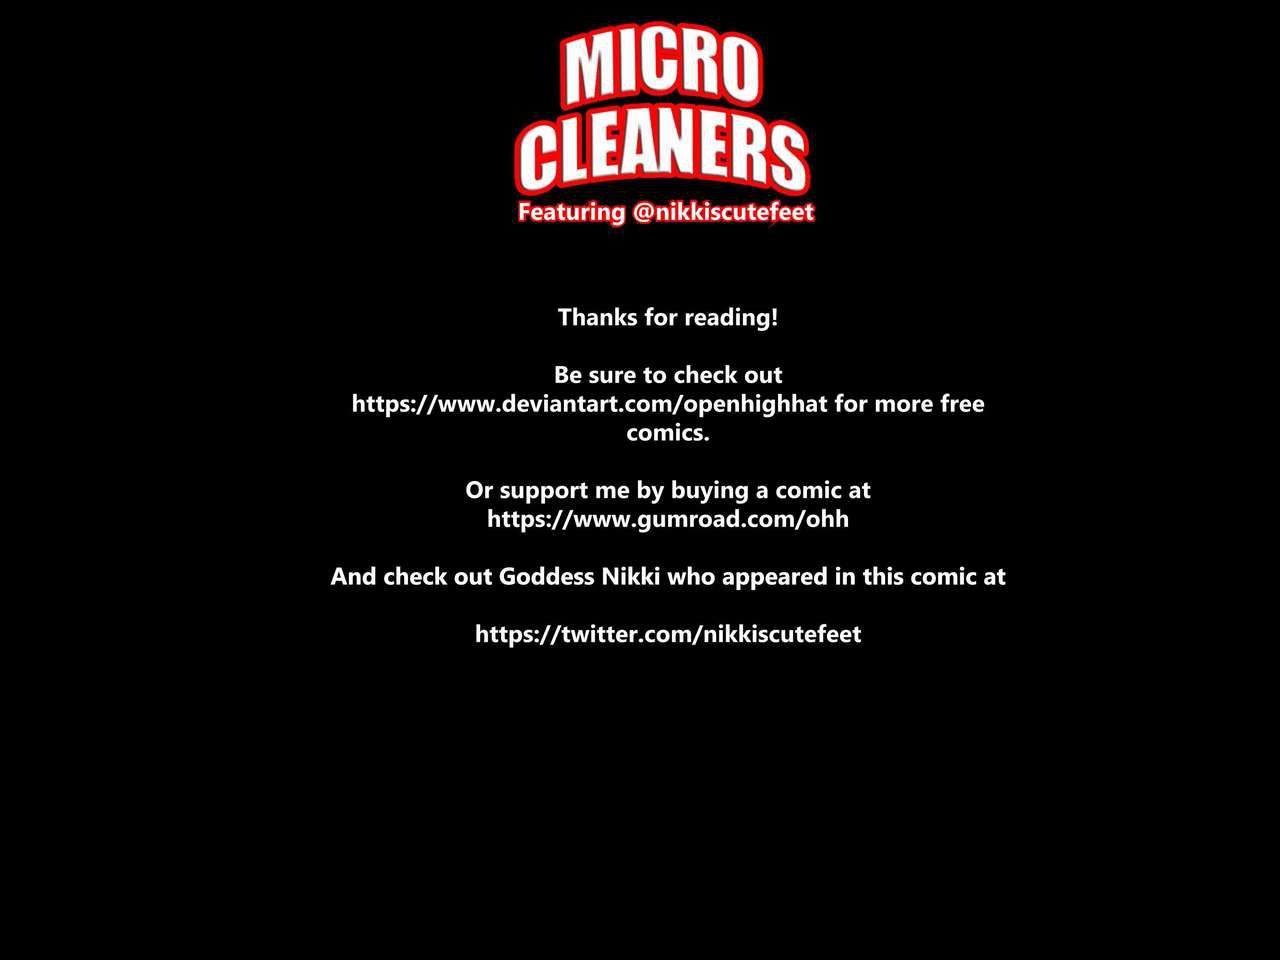 [Openhighhat] Micro Cleaners 29